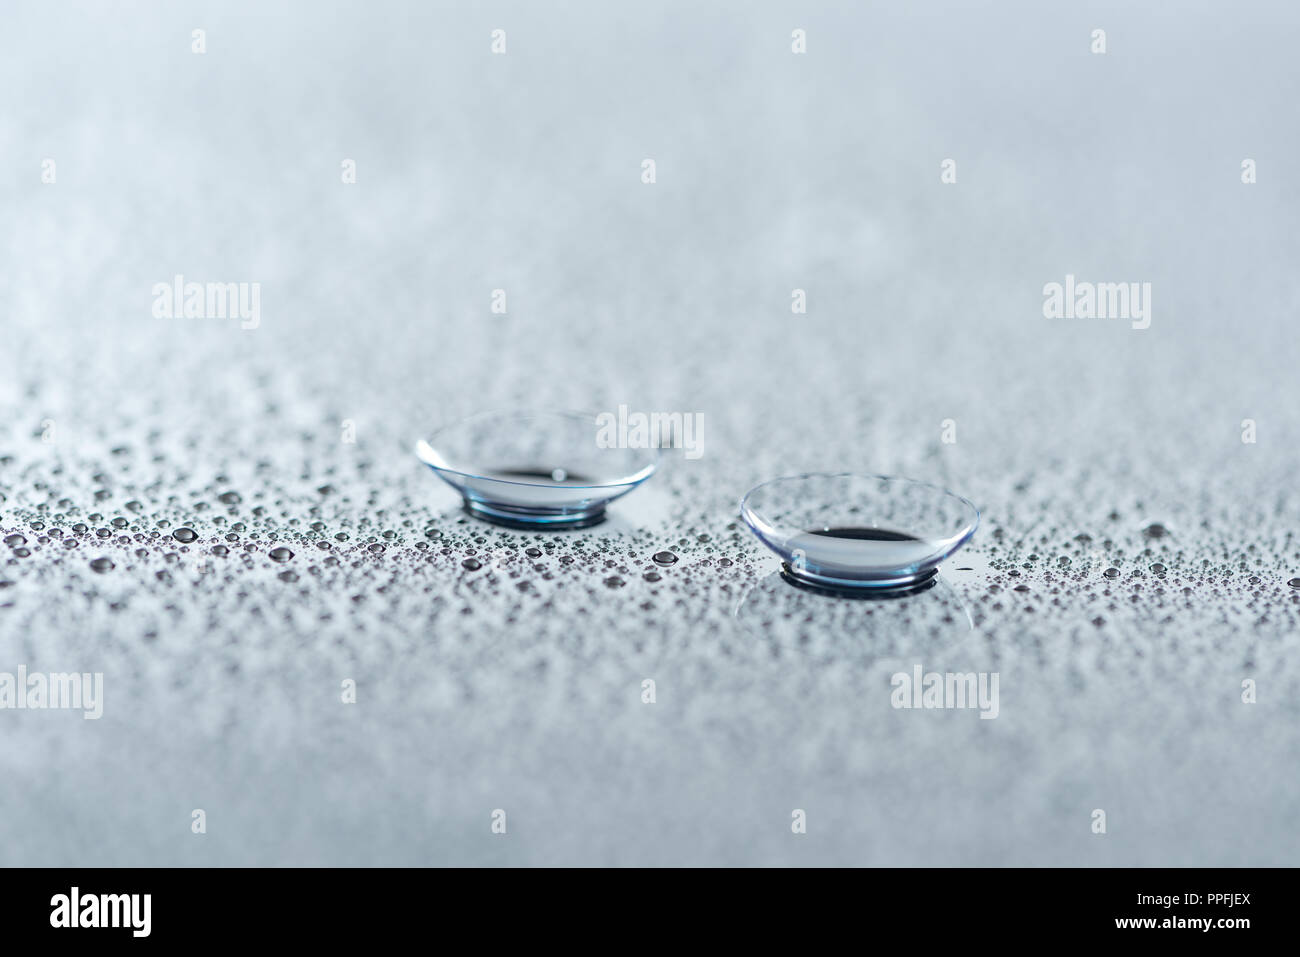 close up view of contact lenses on background with water drops Stock Photo